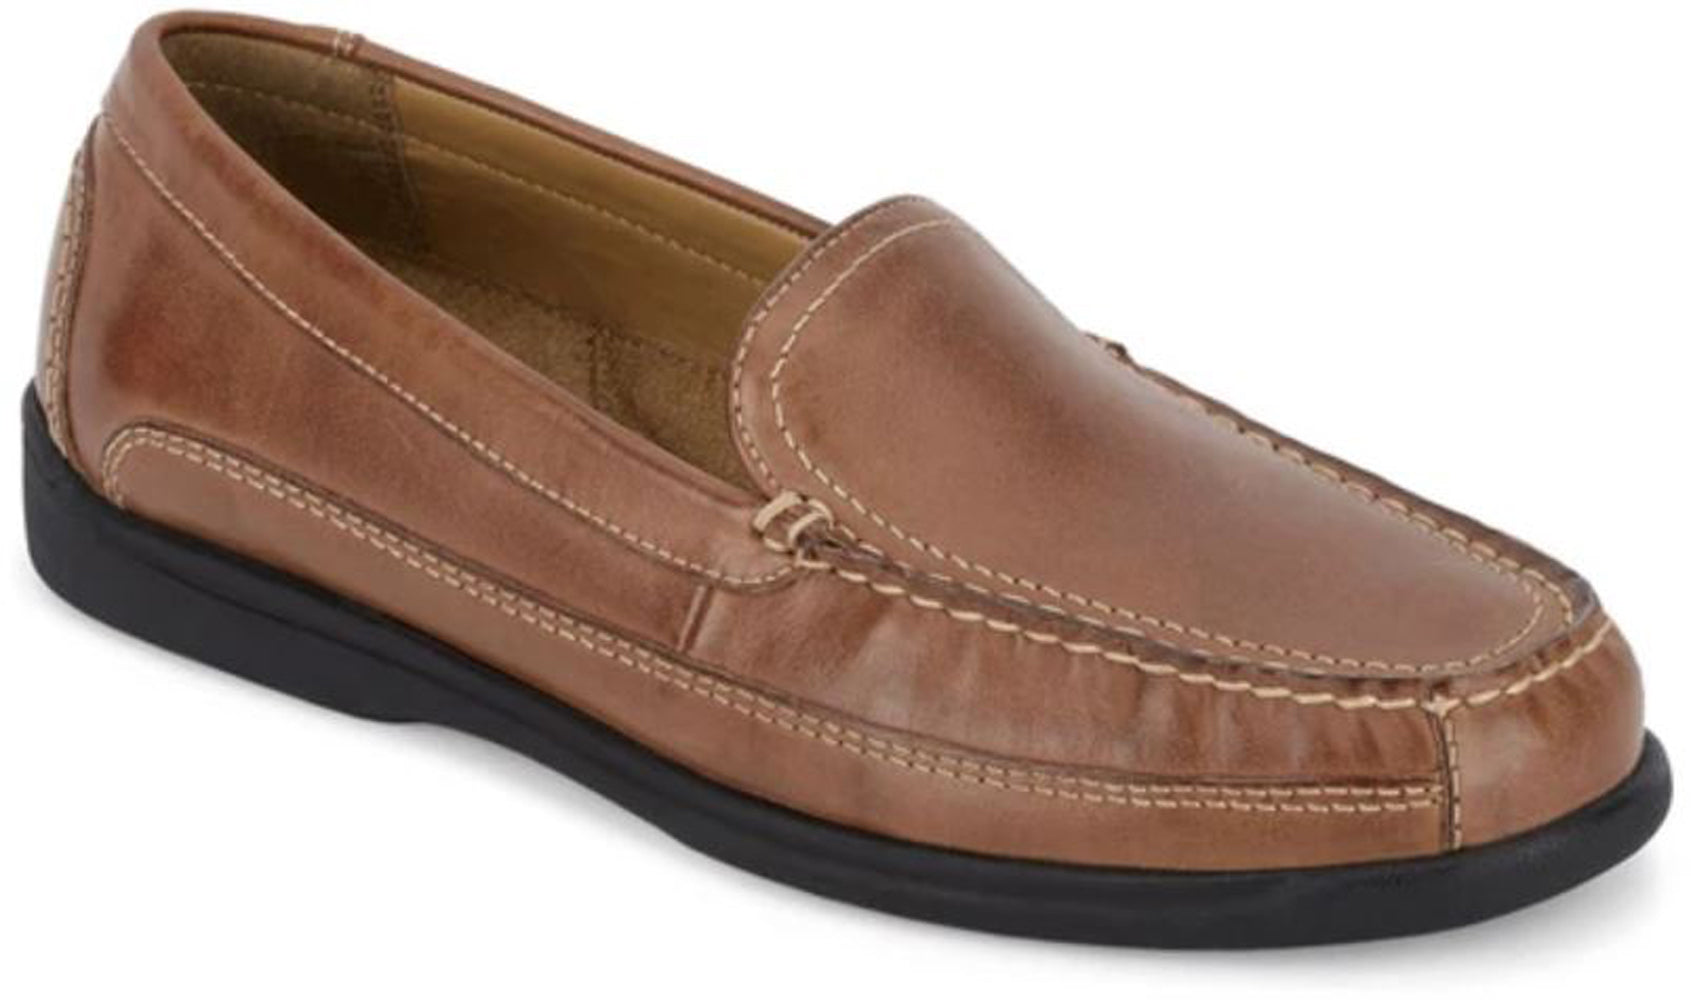 Dockers Footwear Men's Catalina Casual Loafer Shoe in Saddle Tan Side Angle View